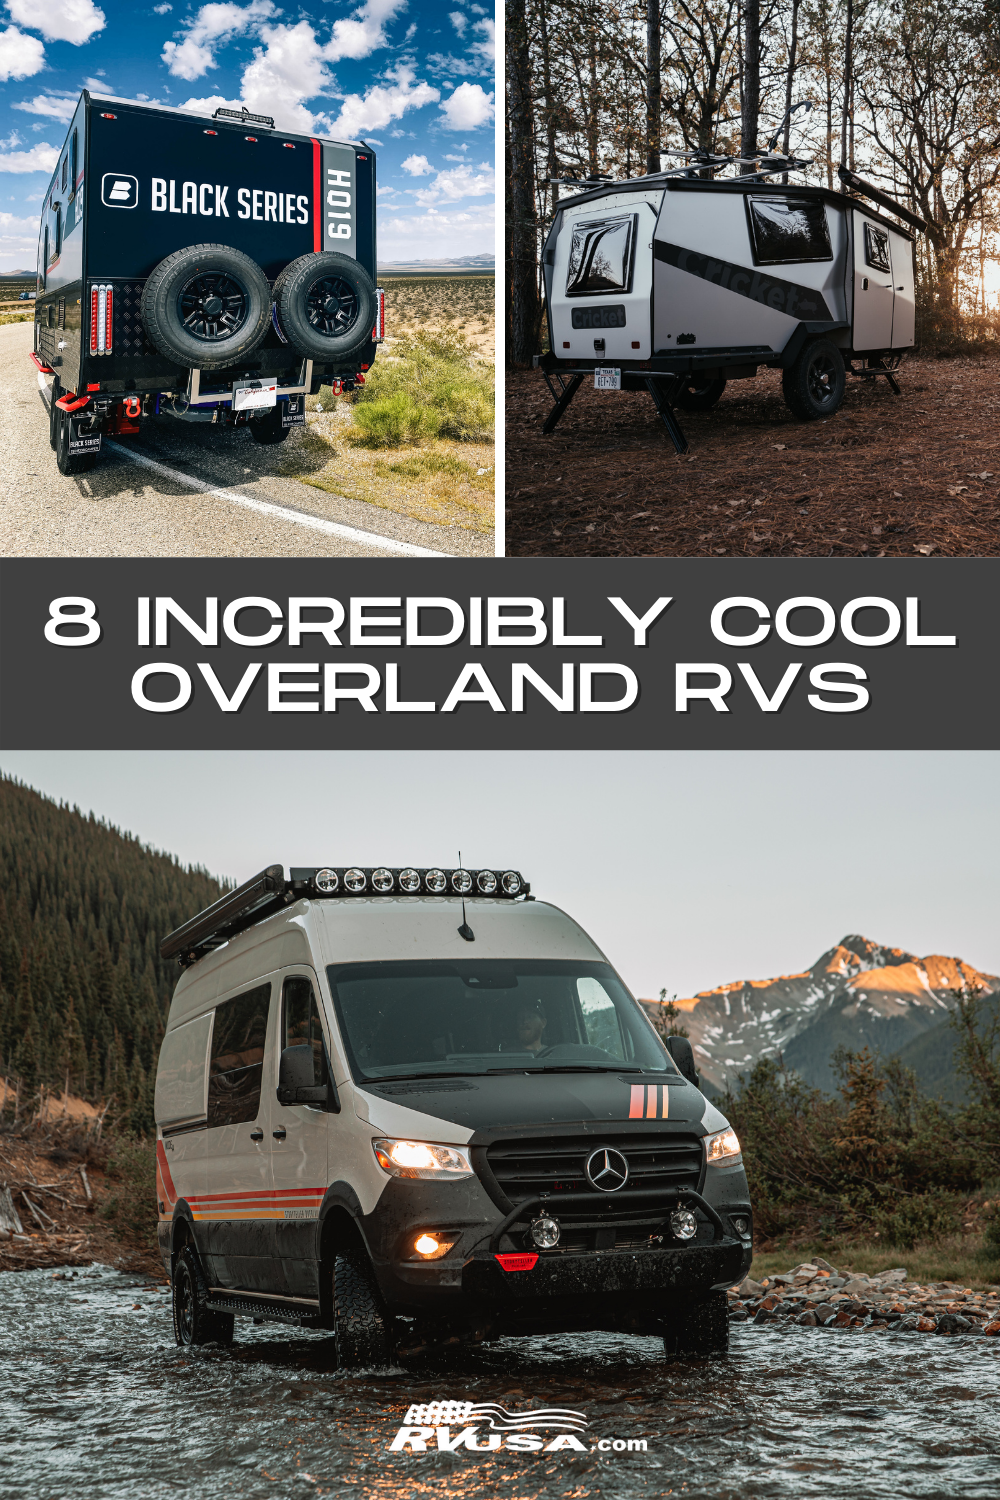 A collage of 3 overland RVs with the text "8 Incredibly Cool Overland RVS"